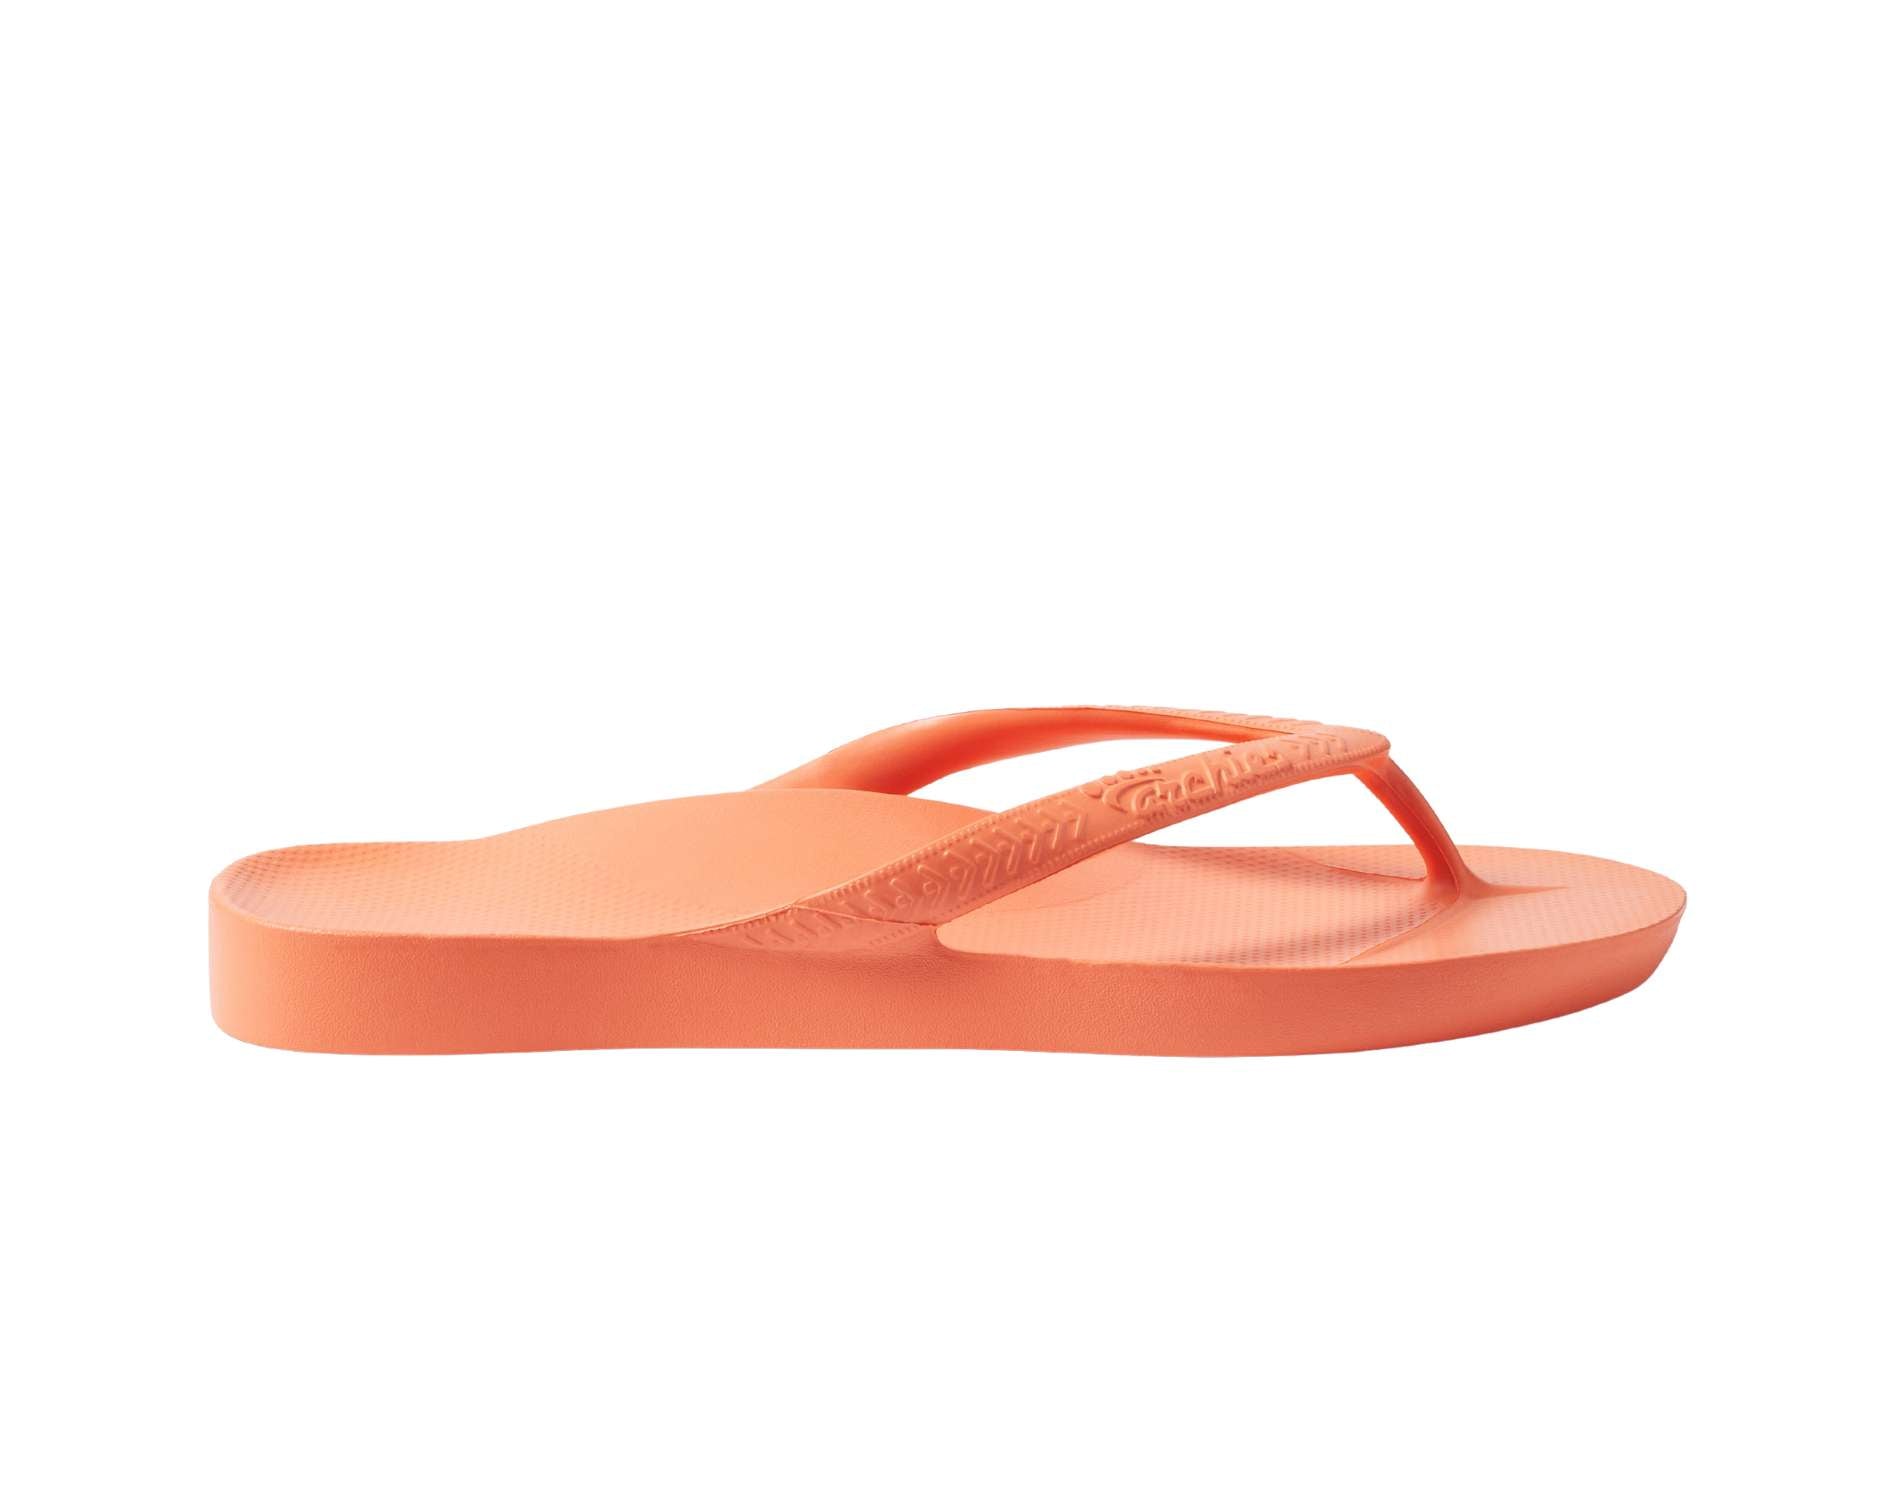 Archie arch support thongs in orange colour